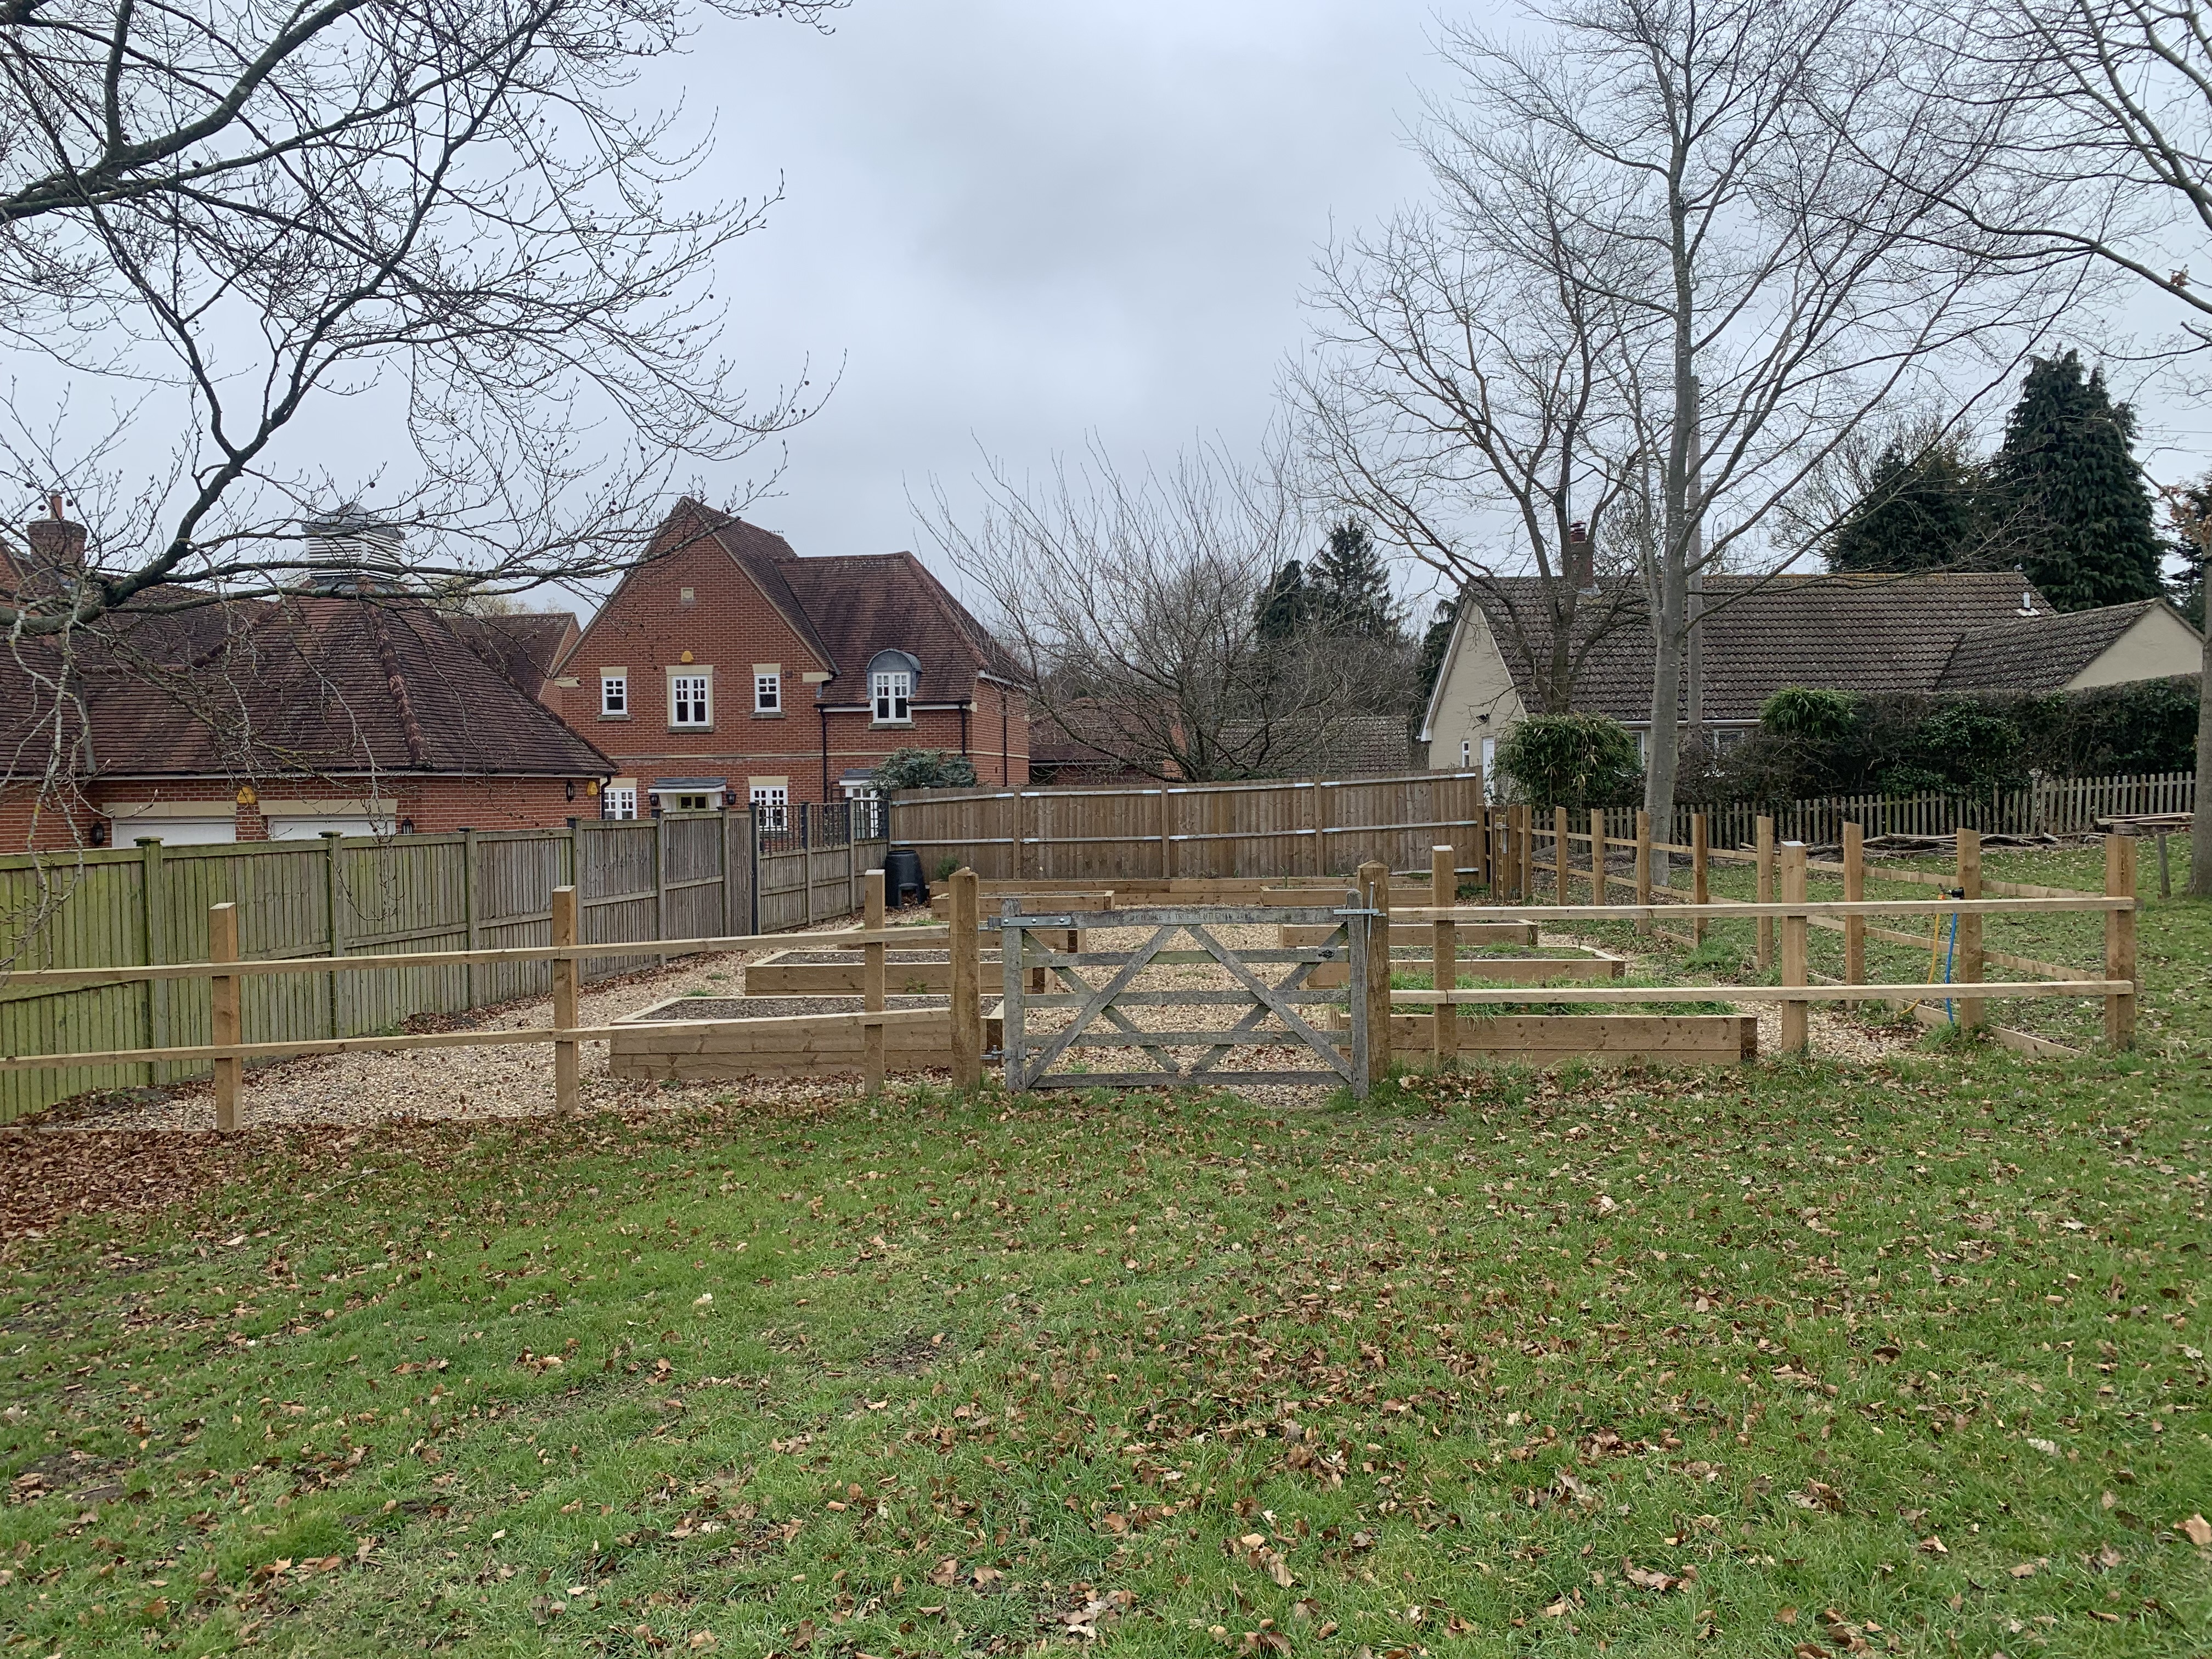 A gate with a fence around a small bit of land with gardens beds planted.